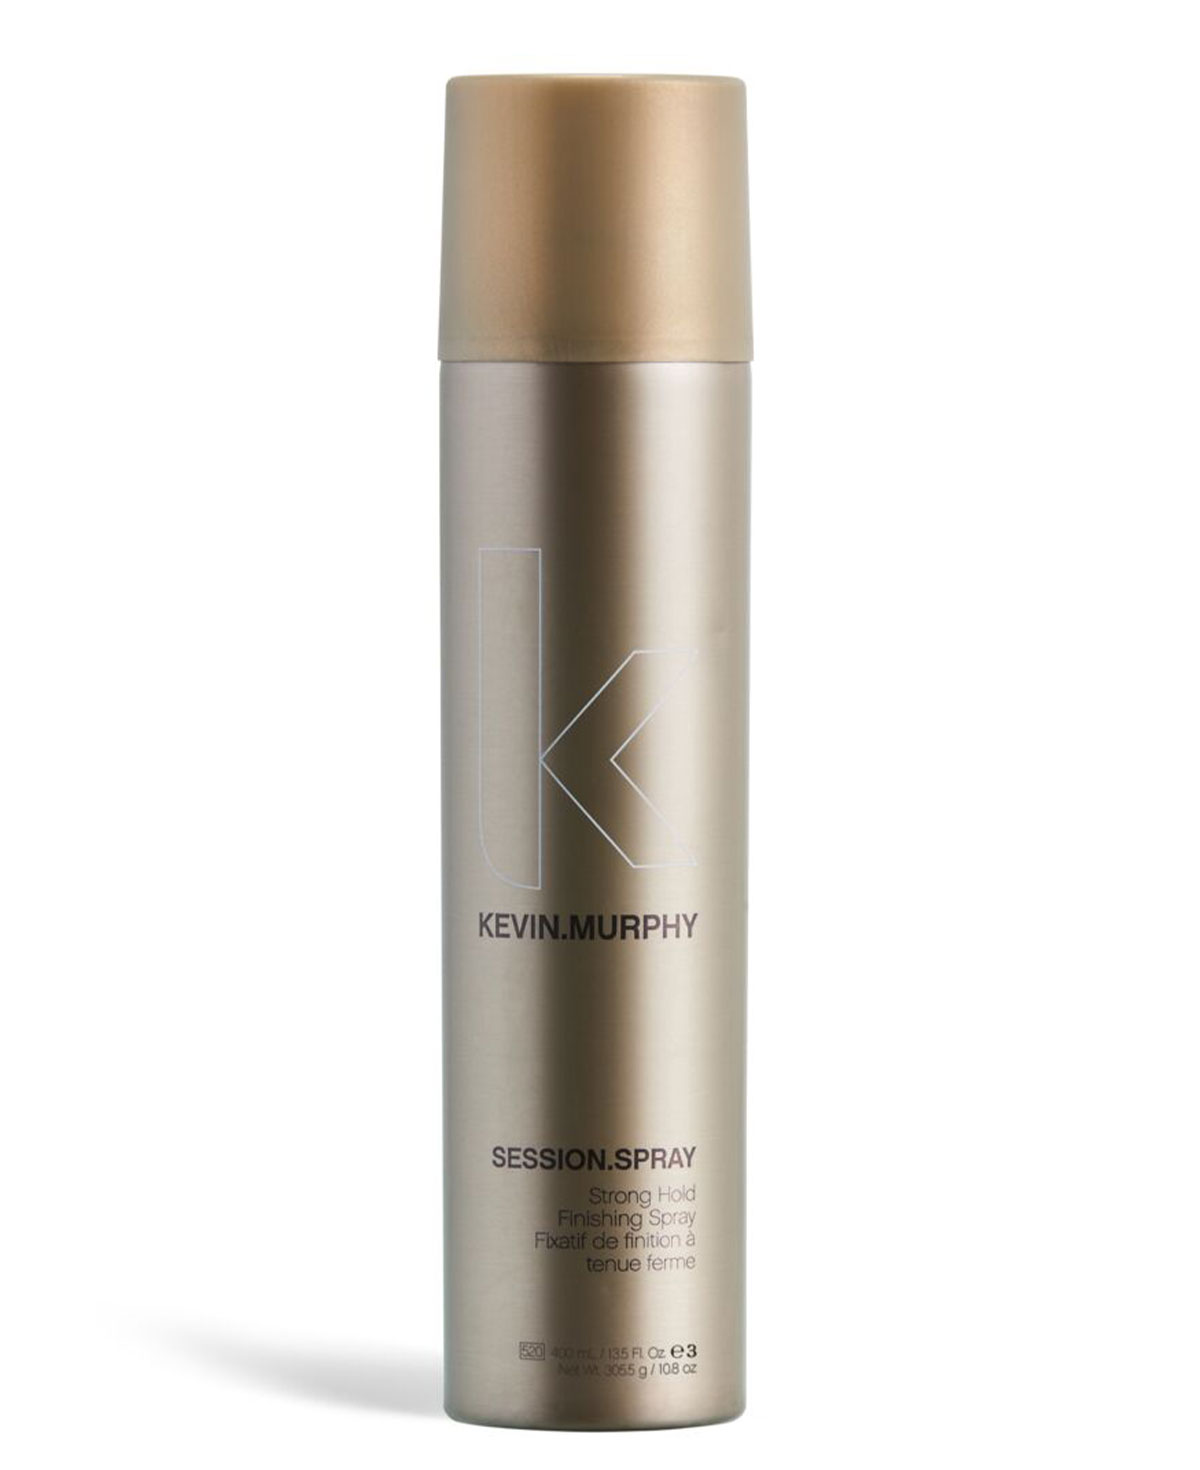 Kevin.Murphy SESSION.SPRAY 100ml